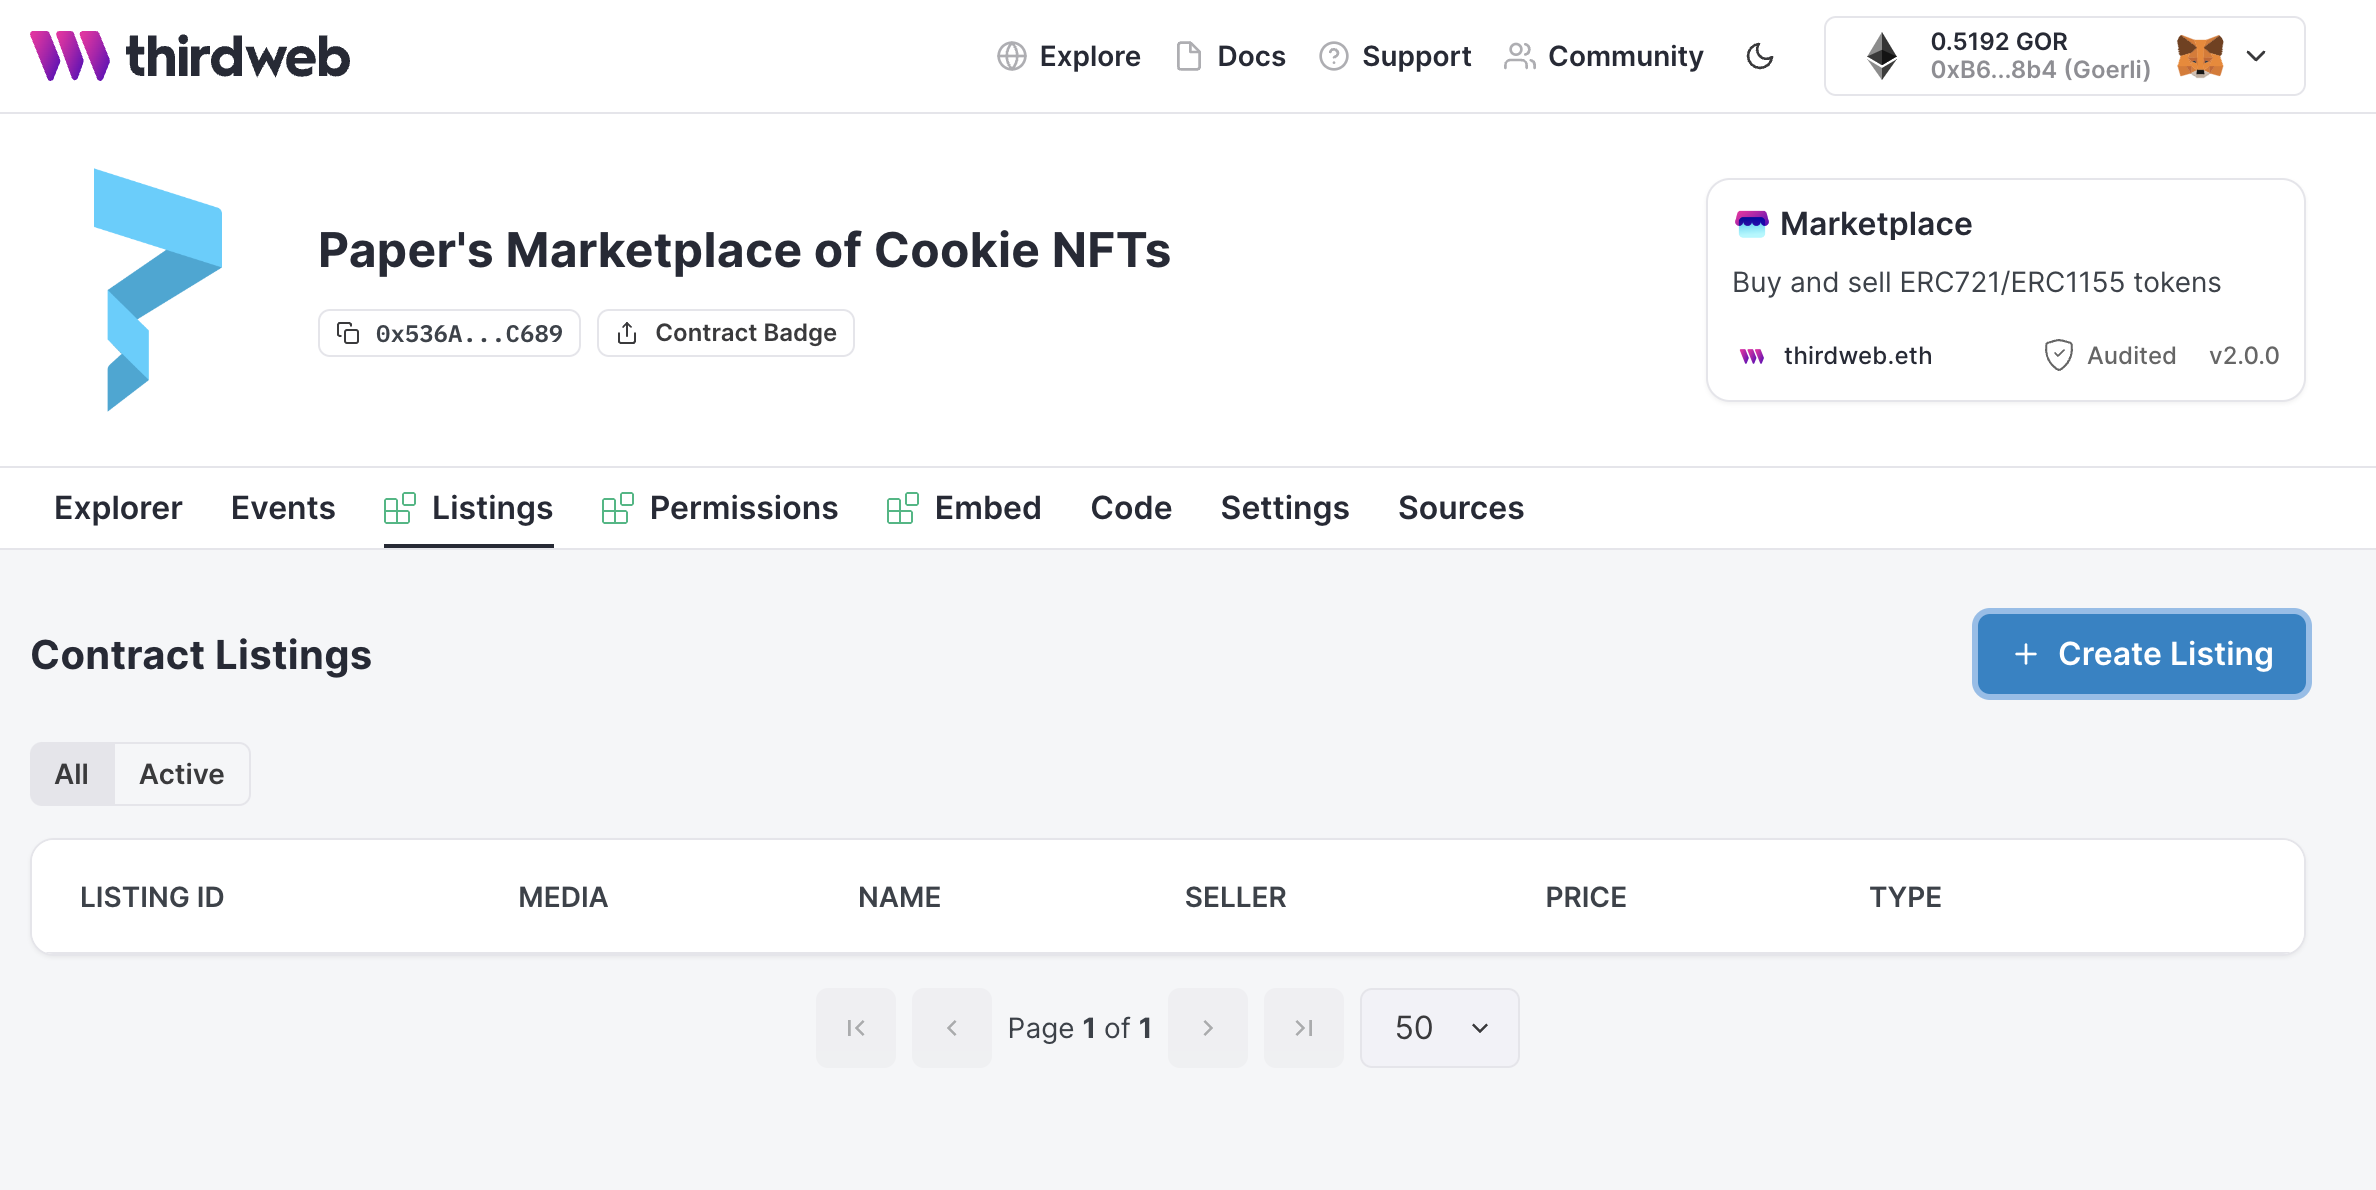 Create listings to add NFTs to the thirdweb smart contract